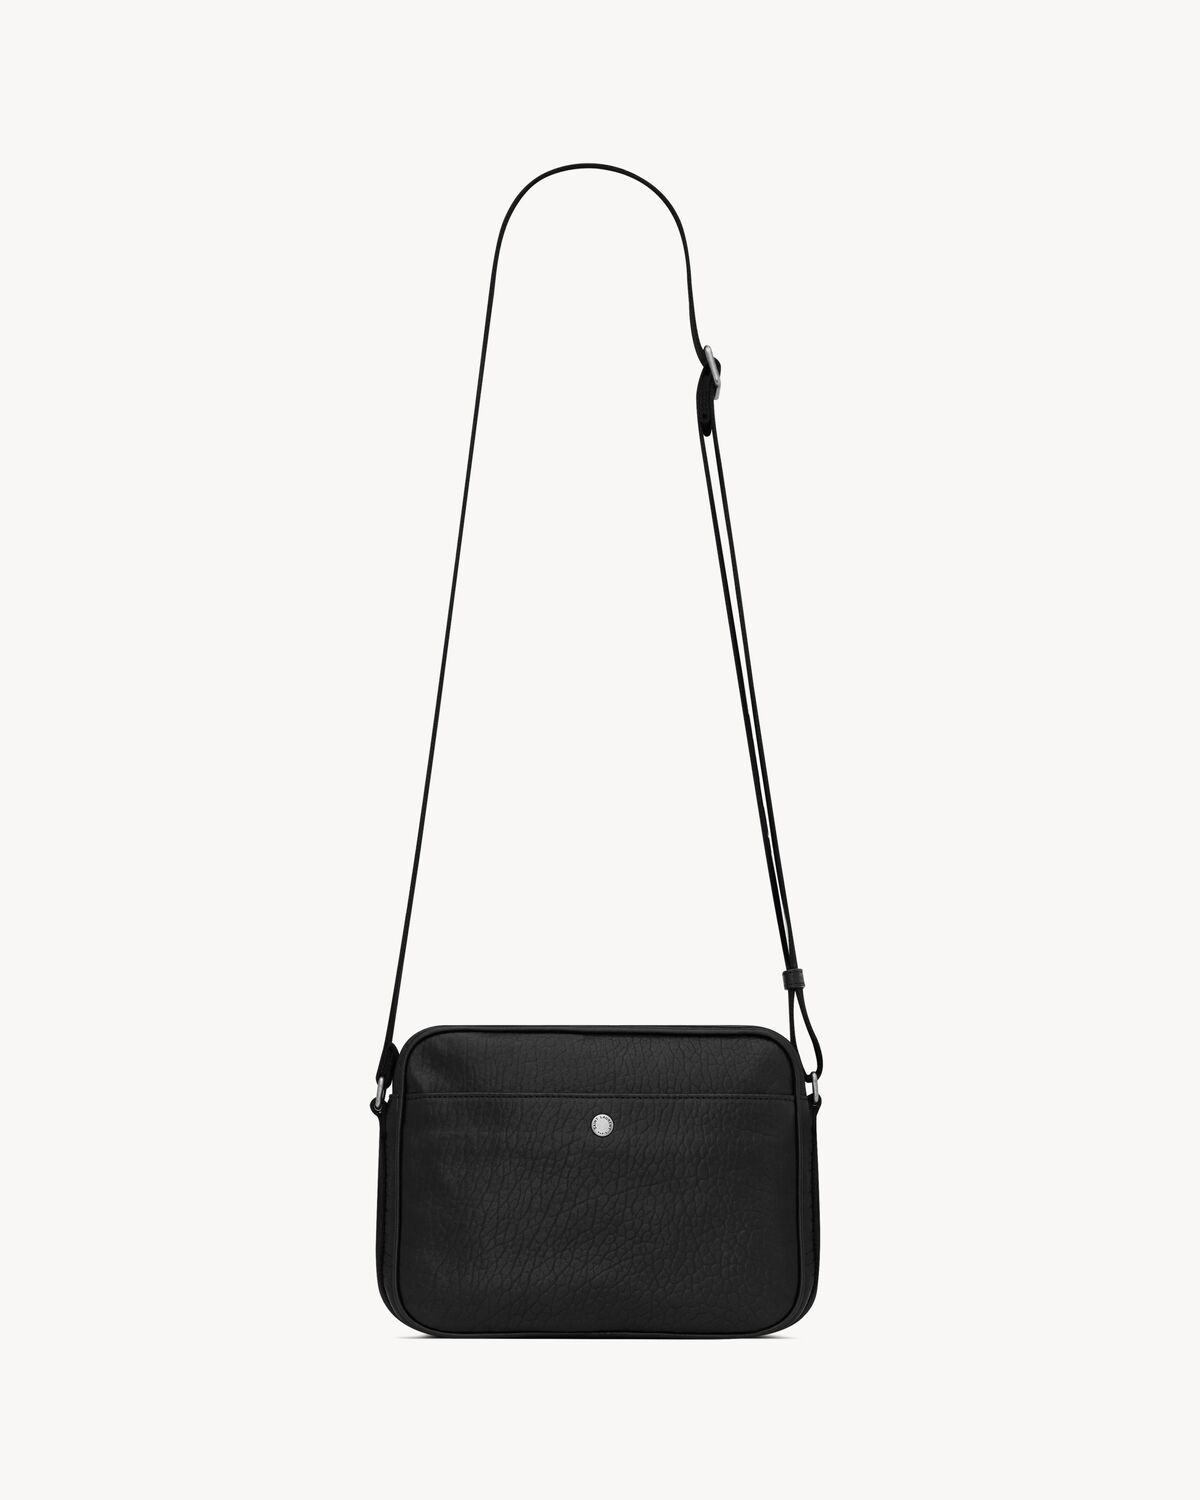 CITY SAINT LAURENT CAMERA BAG IN GRAINED LEATHER